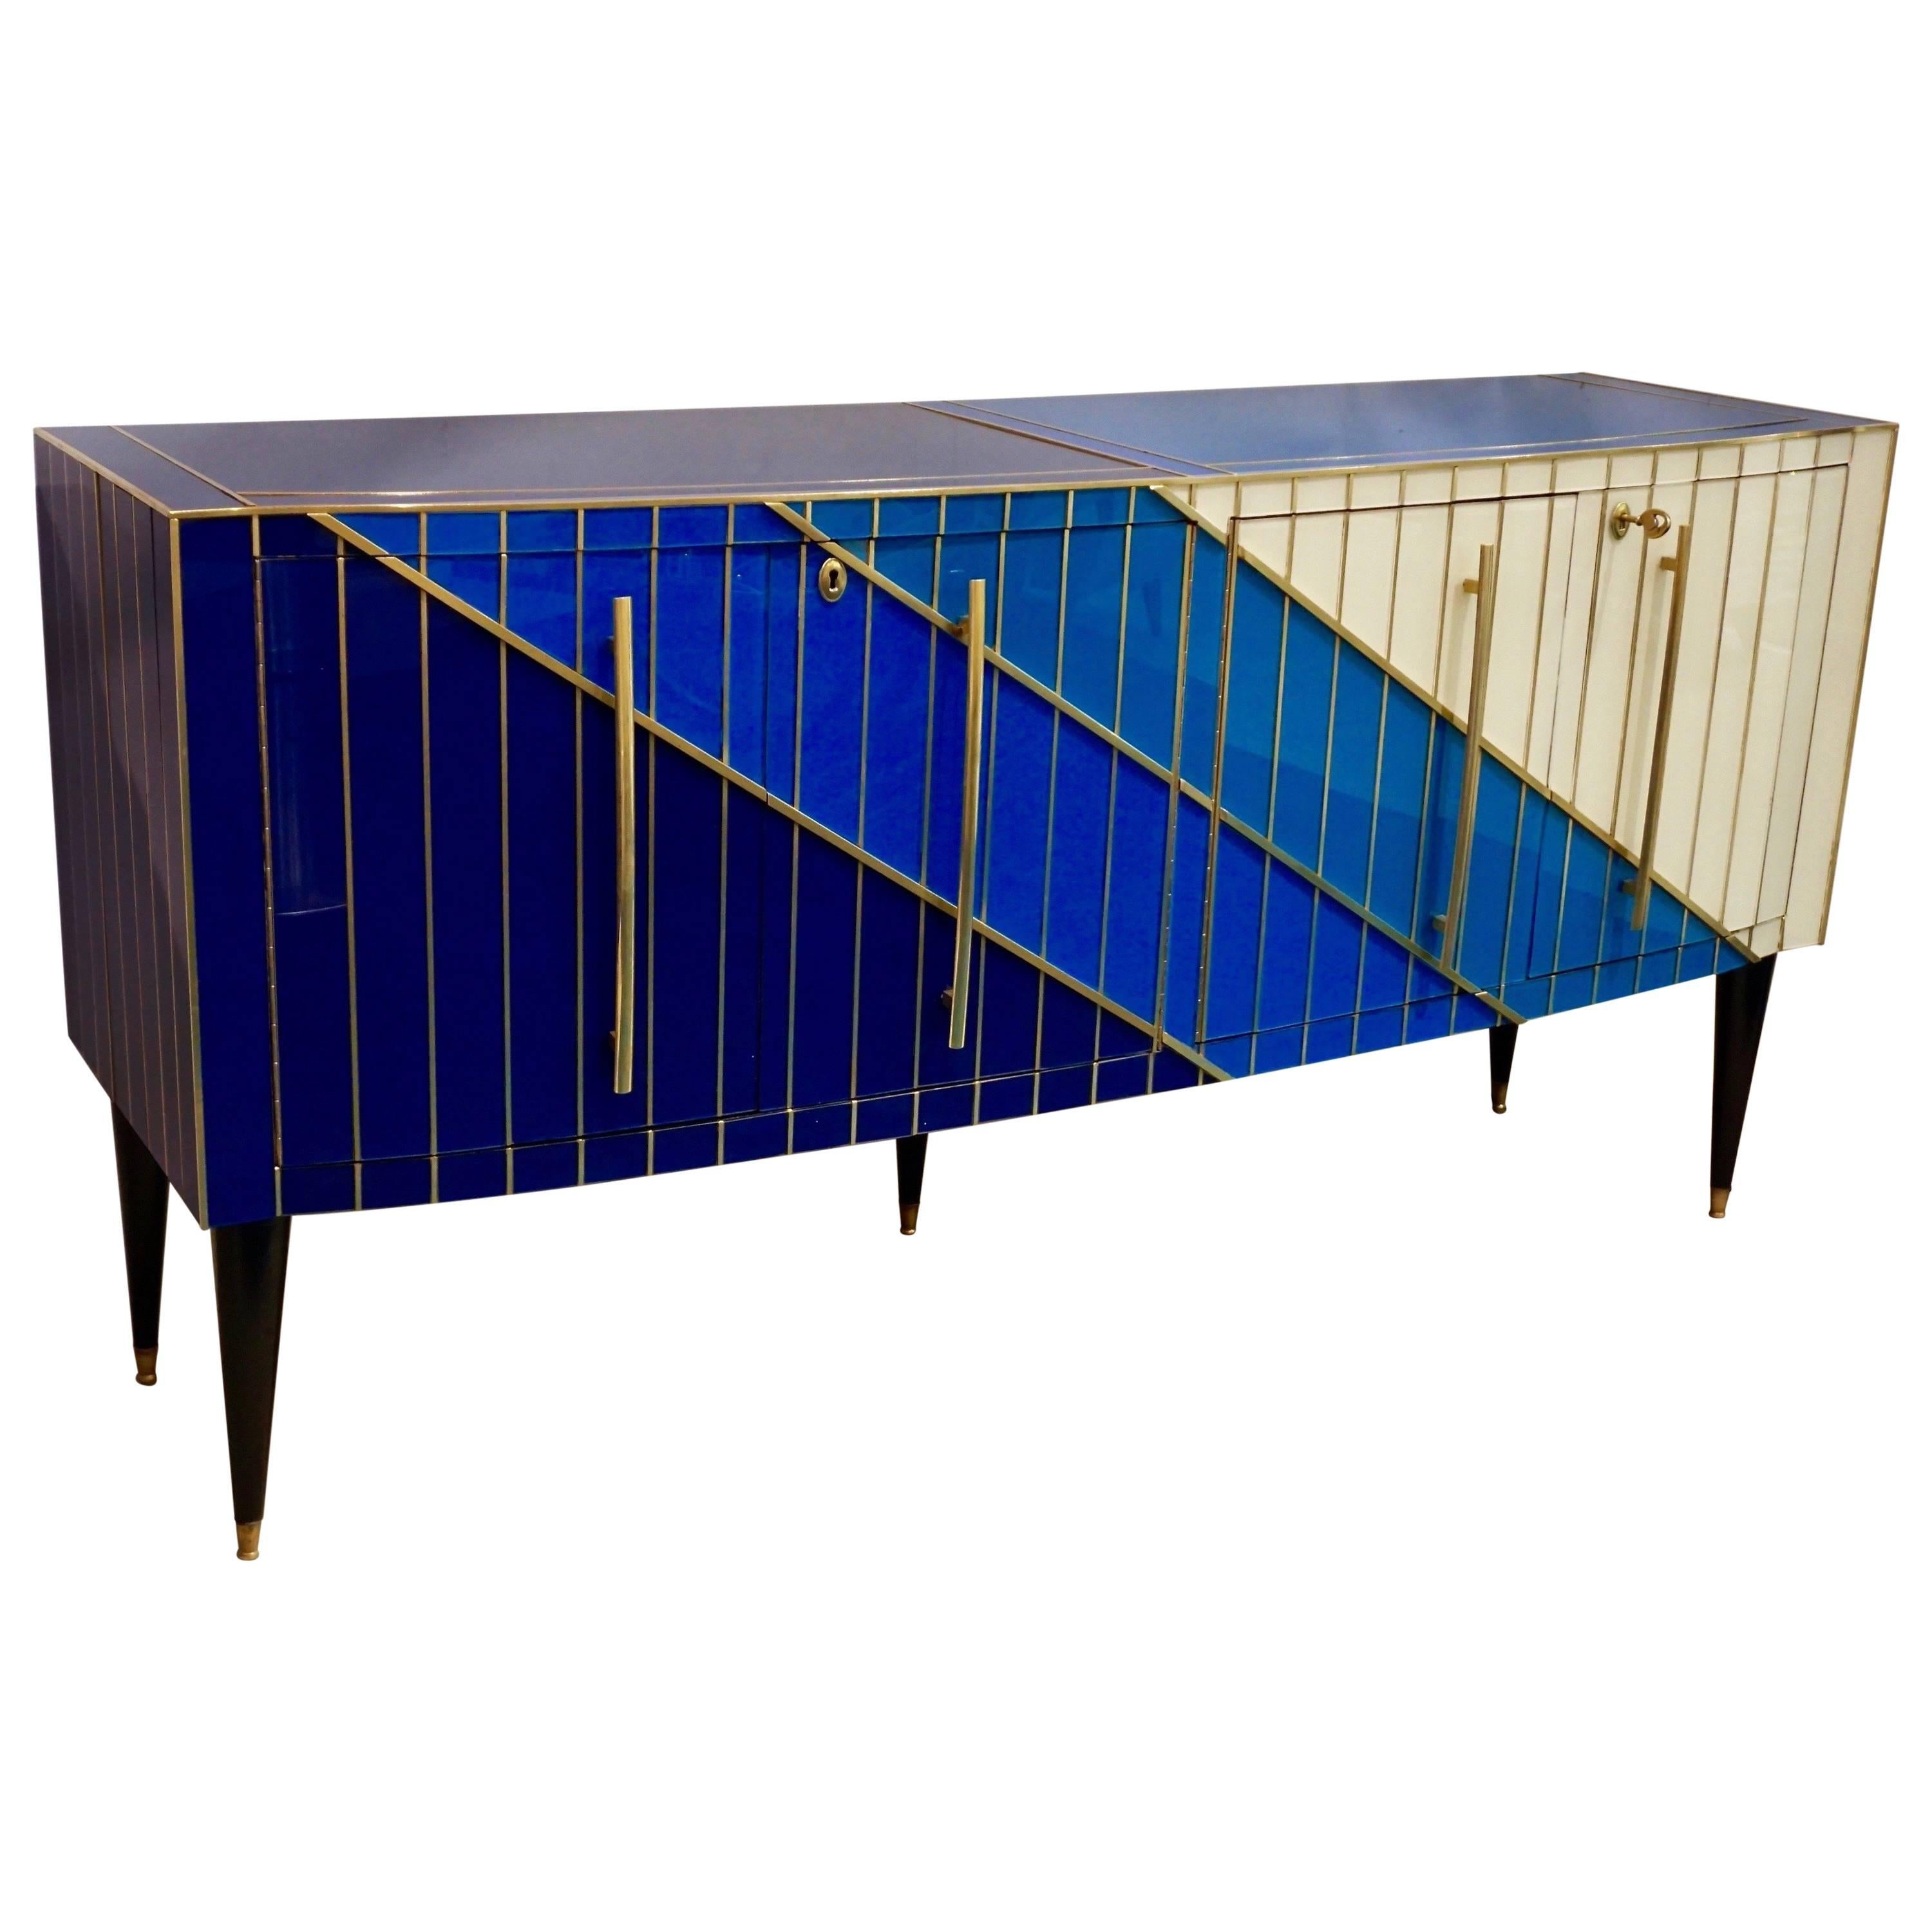 1990s Italian Modern Brass and Glass Bowed Sideboard in Blue and Cream White